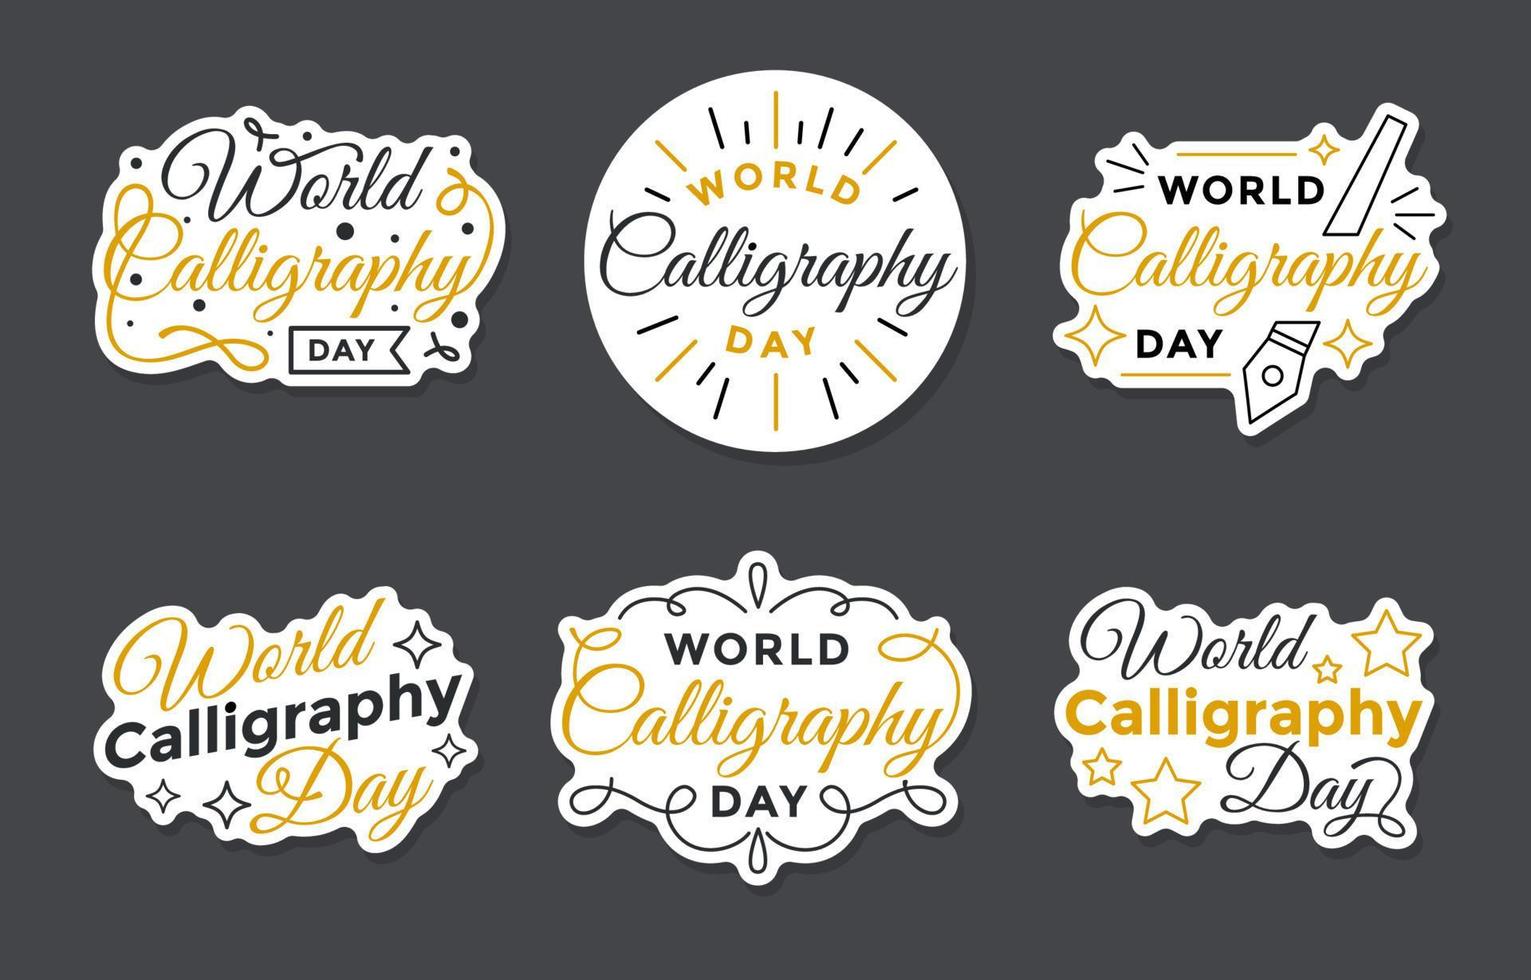 World Calligraphy Day Stickers Set vector